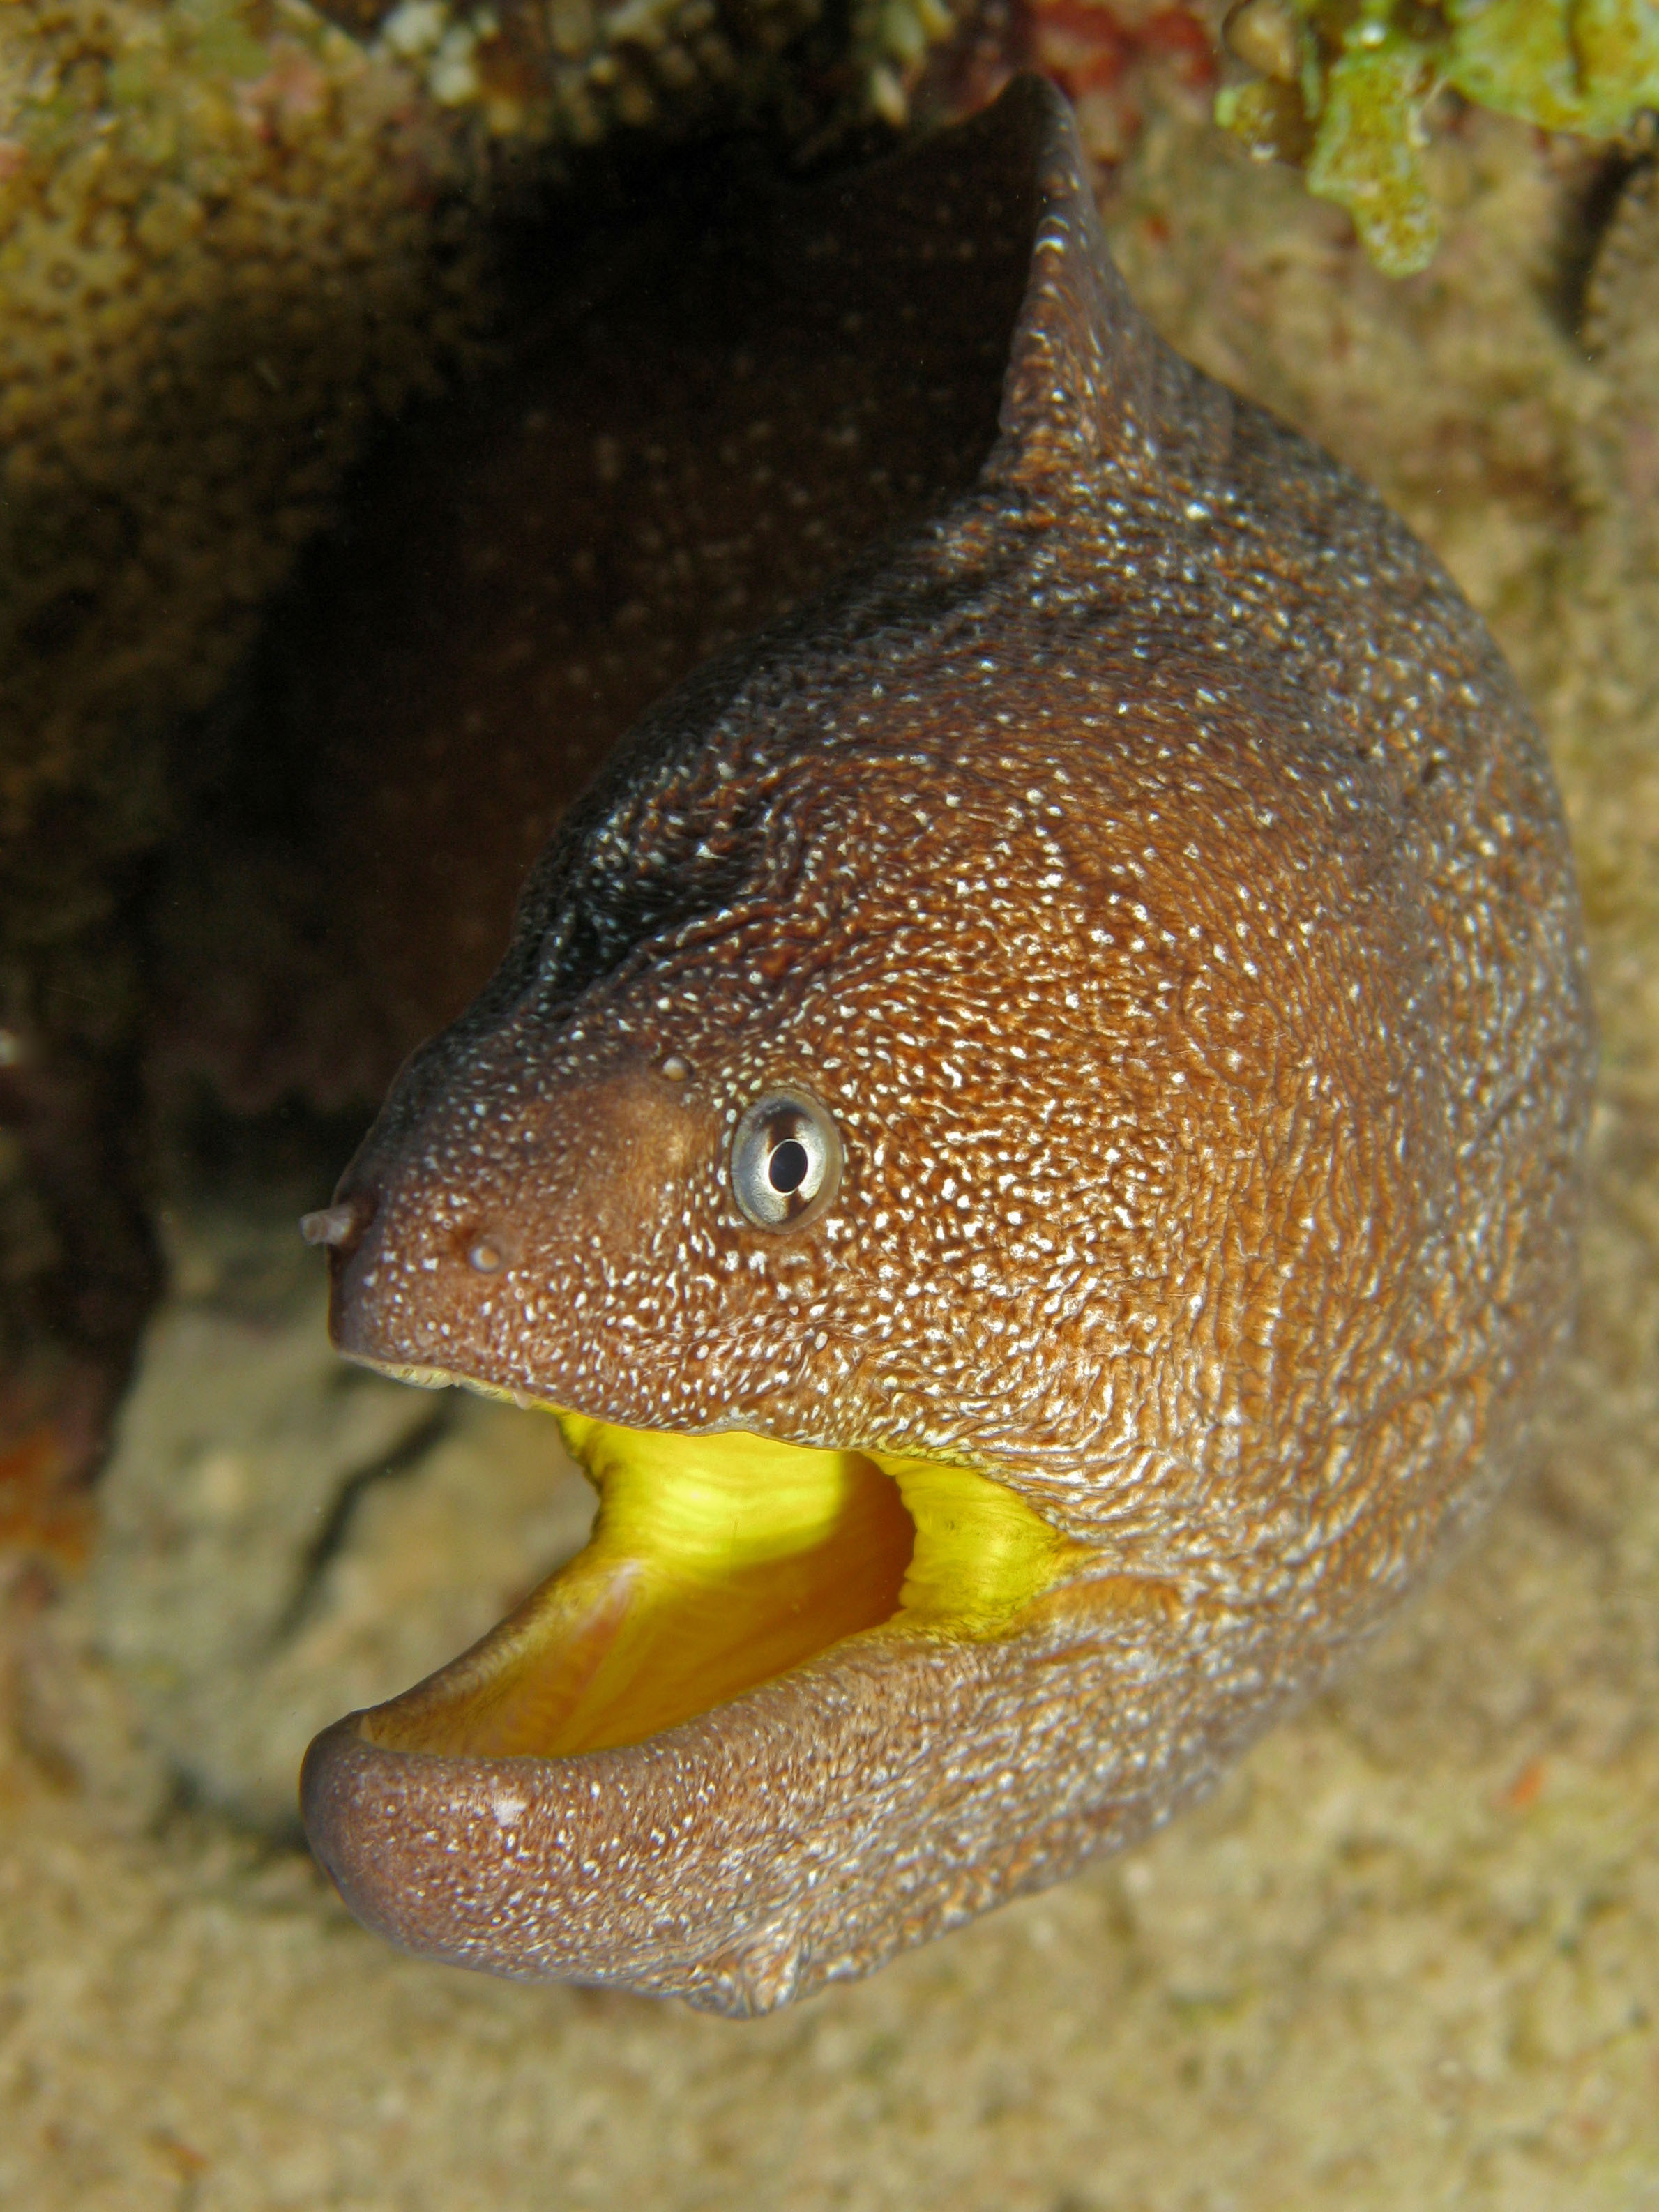 Yellowmouth moray eel peers out from the rock opening his mouth so that divers can take photos